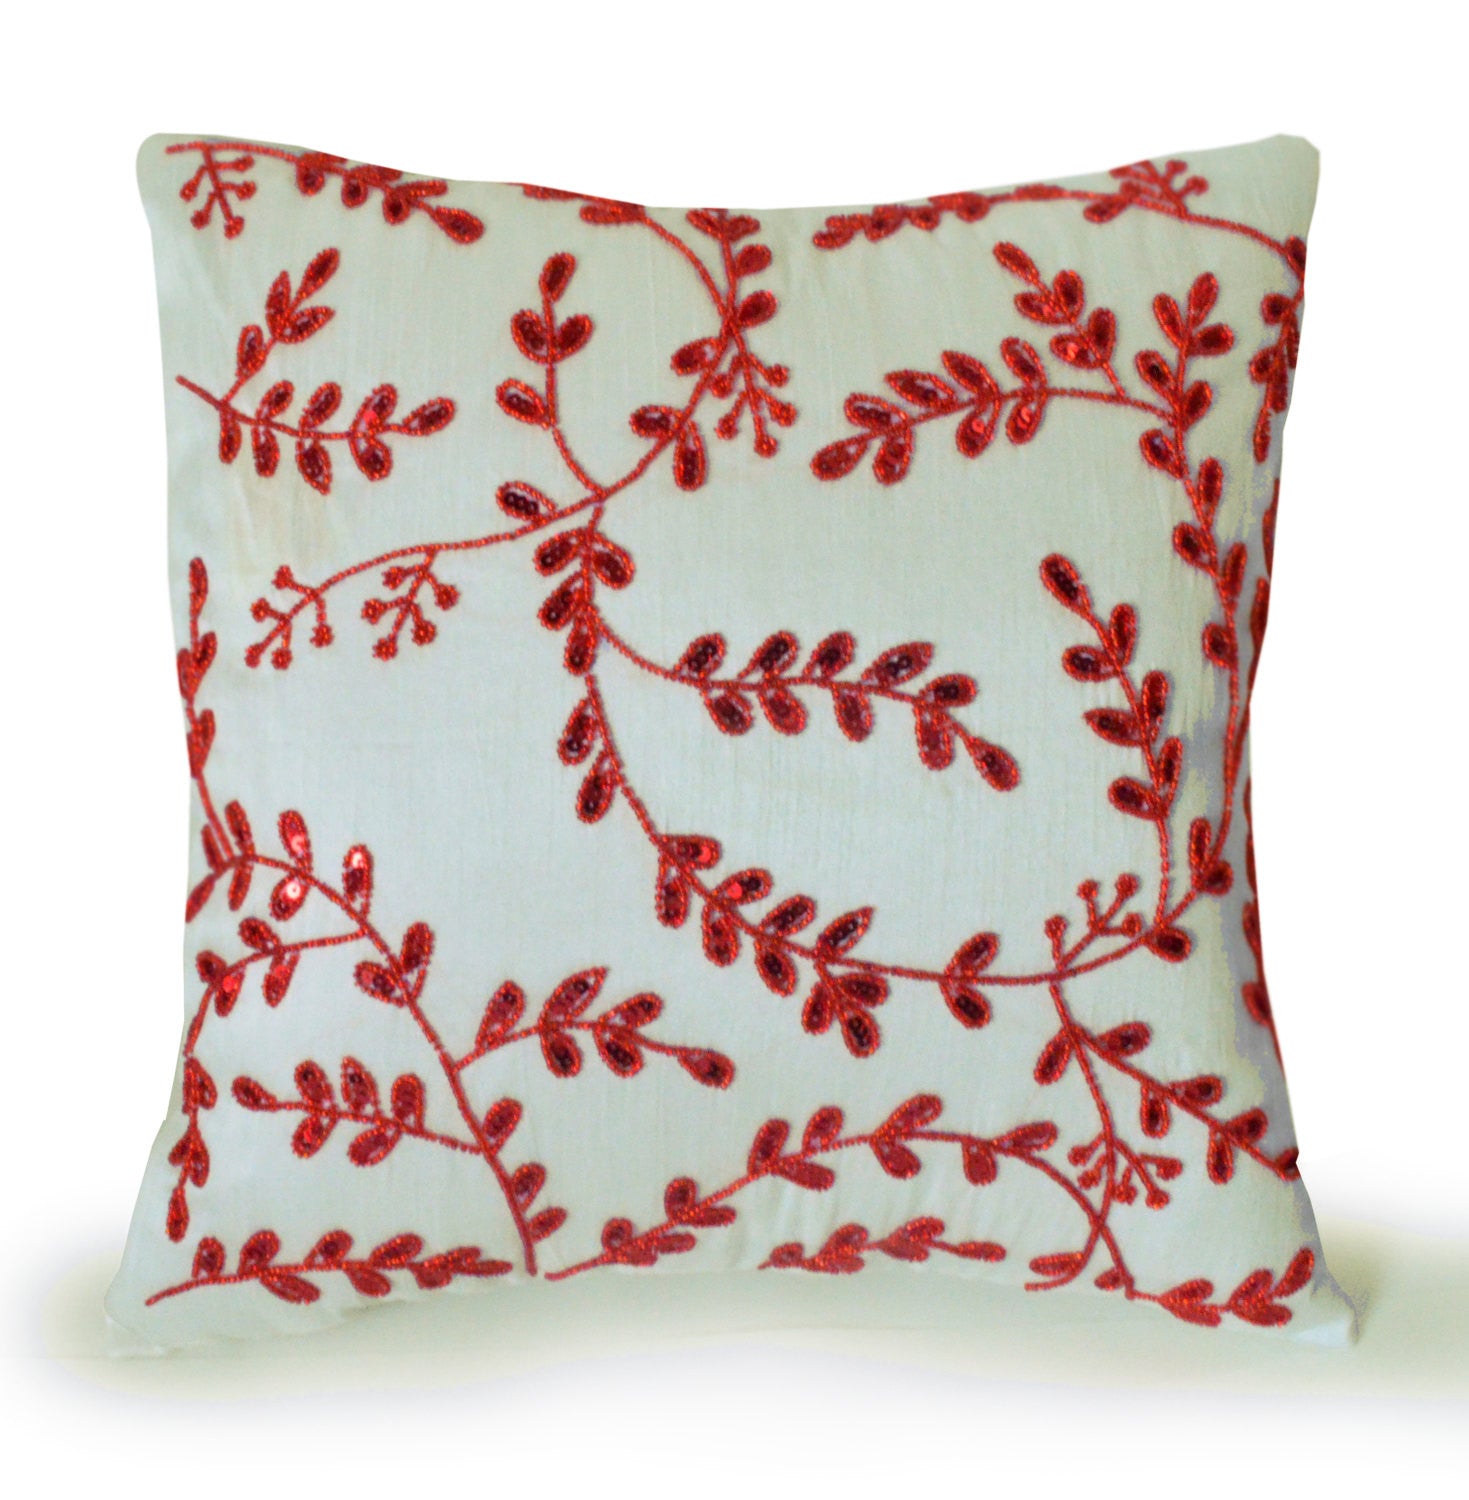 Ivory silk throw pillow with red sequins beads floral design